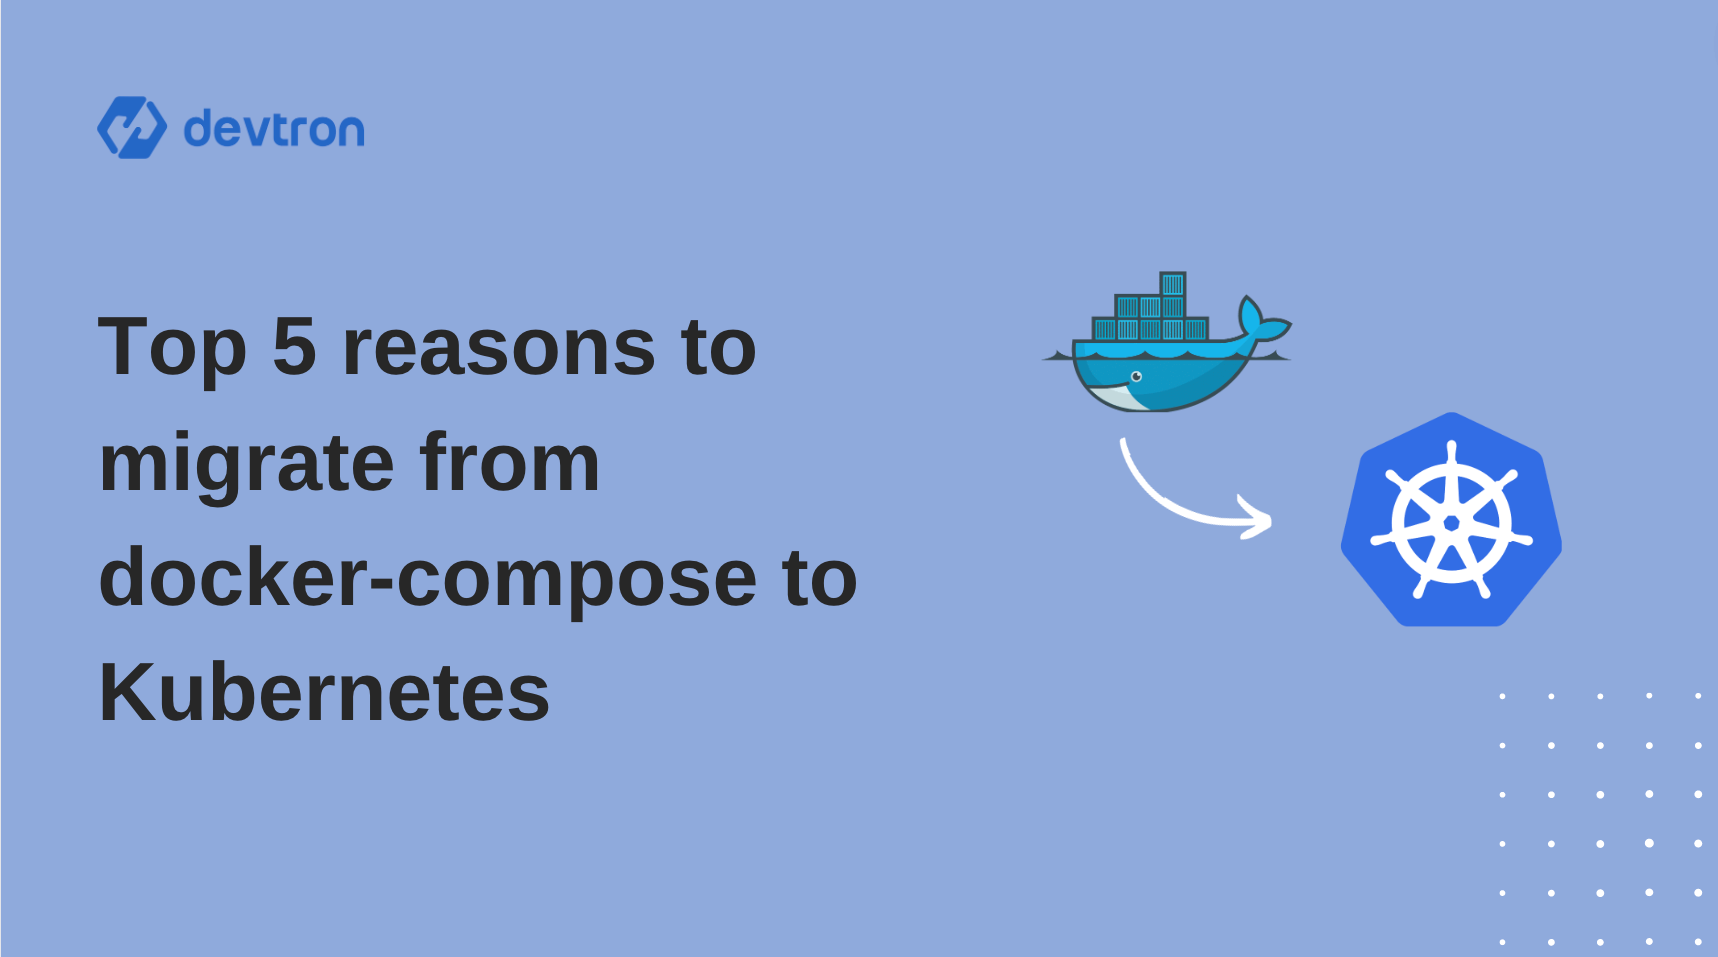 Top 5 reasons to migrate from docker-compose to Kubernetes